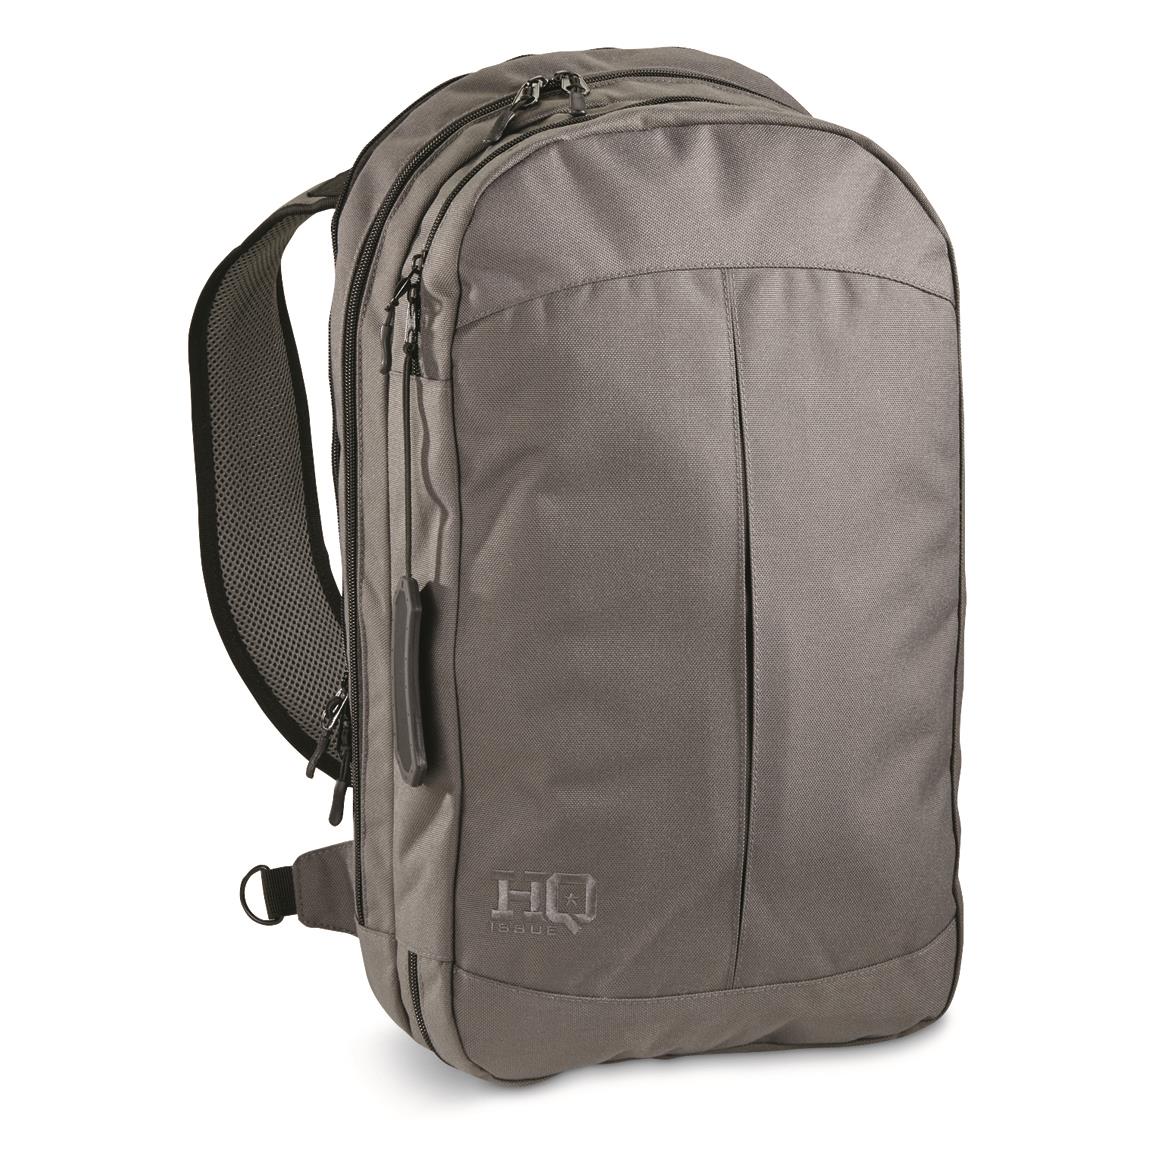 HQ ISSUE Concealed Carry Sling Back Pack with Armor Pocket 